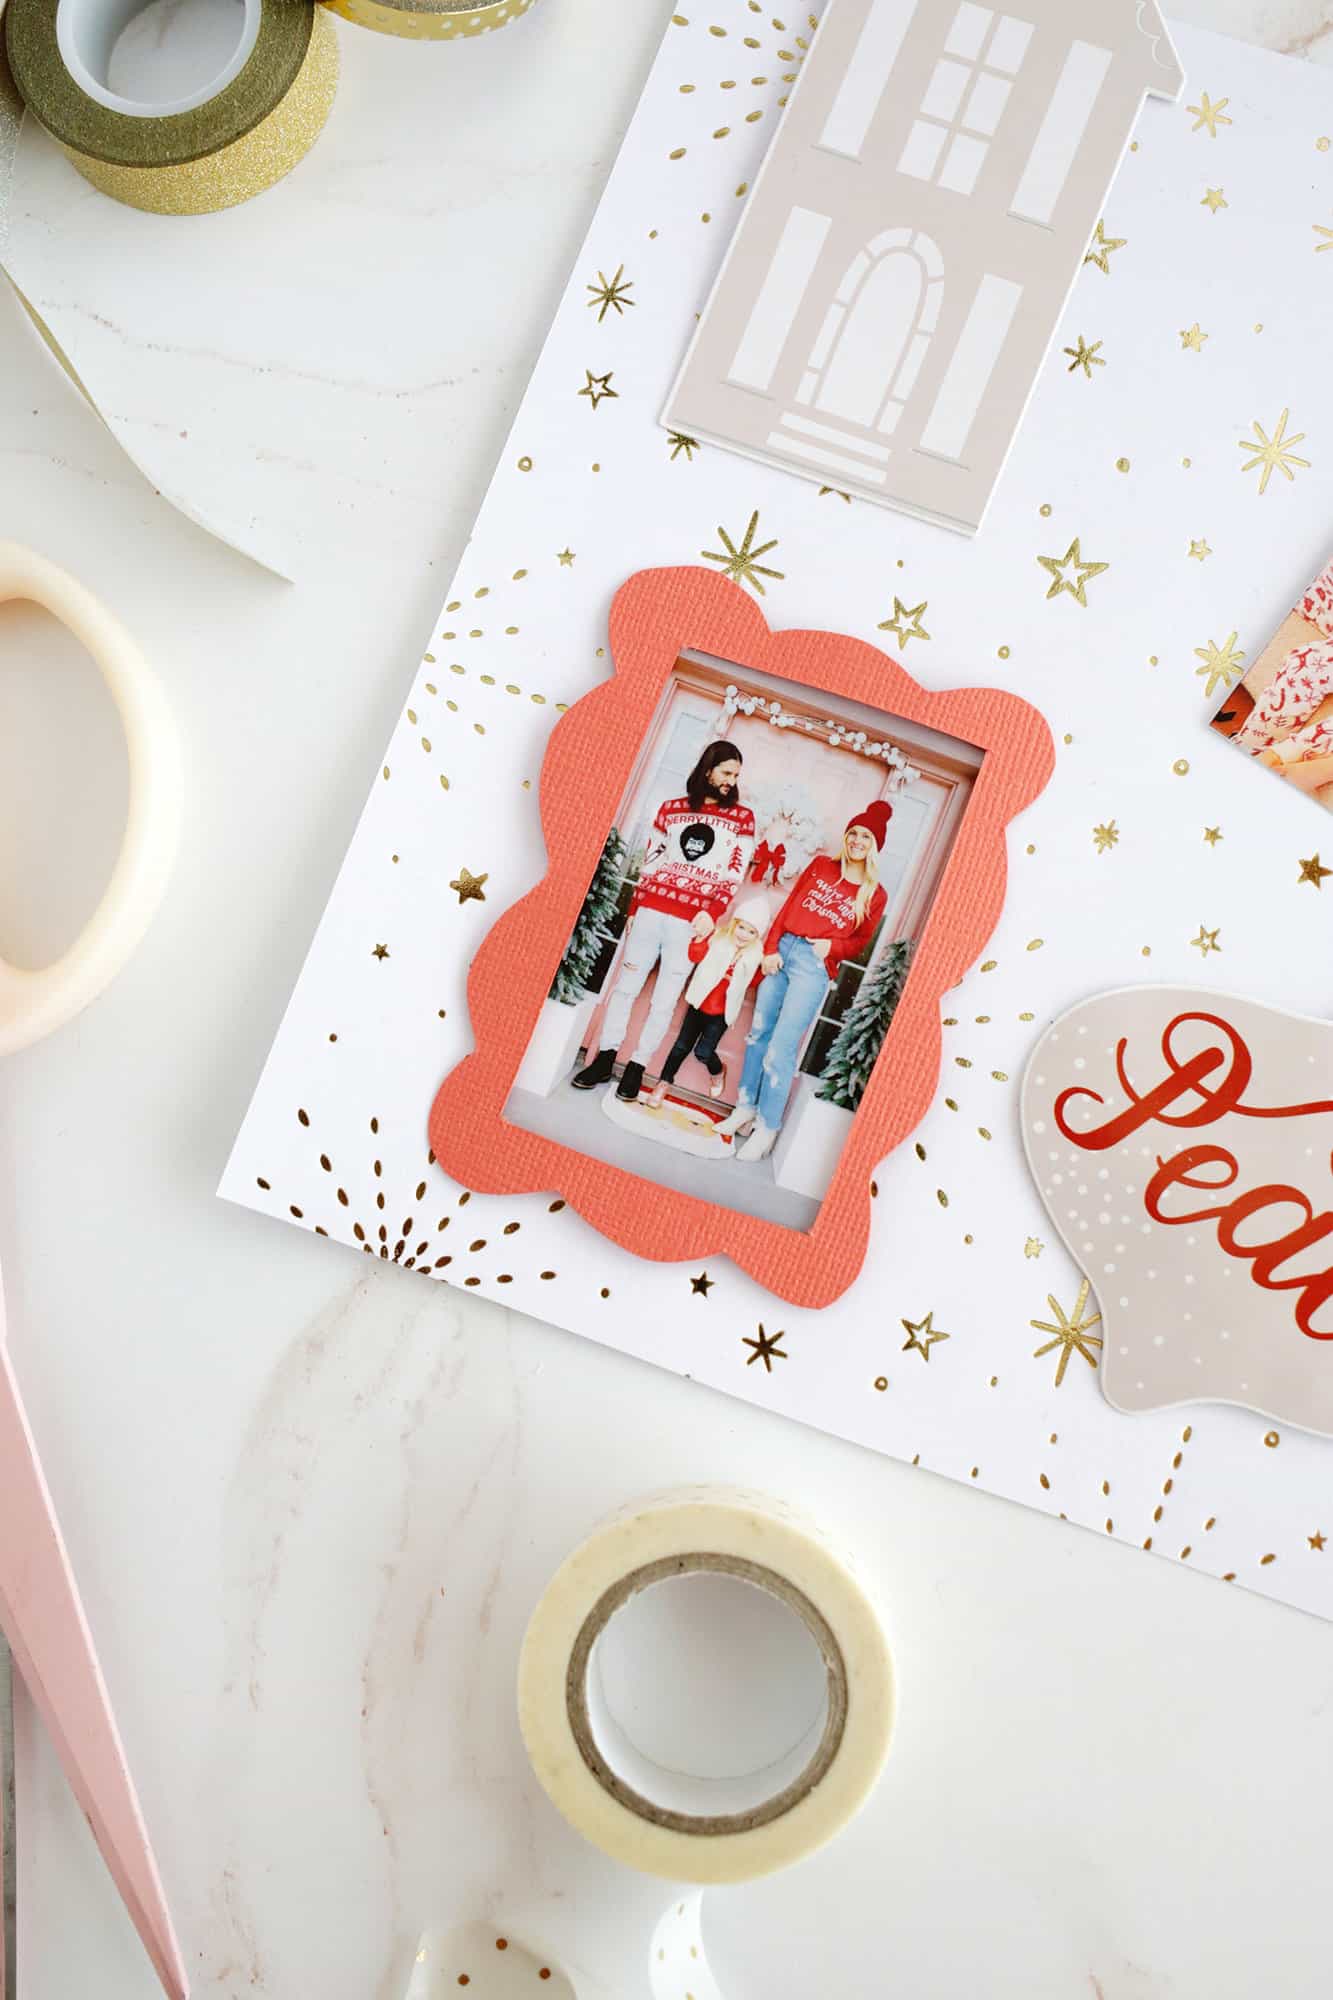 easy scrapbooking idea with photos and stickers with a paper frame around the photos